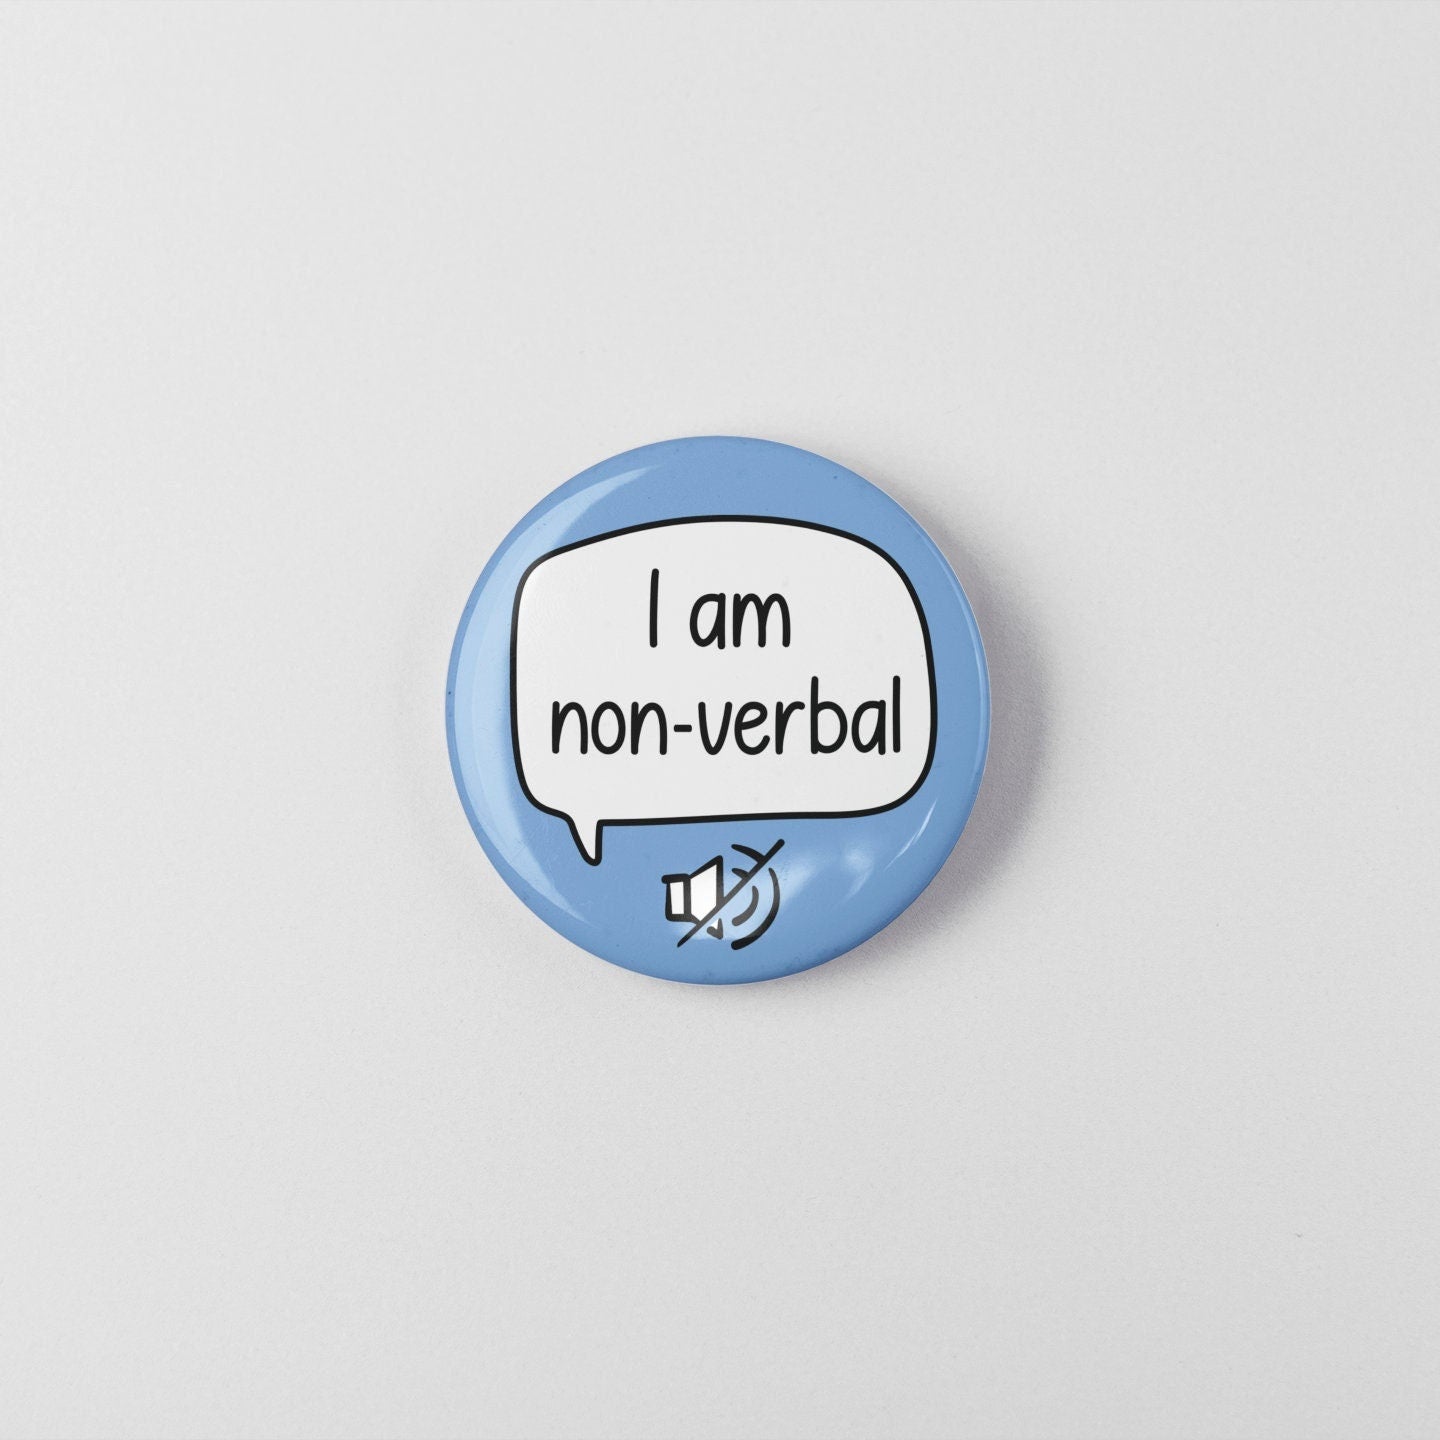 I Am Non-Verbal Badge Pin | Non-Verbal communication - Autistic Gift - Disability